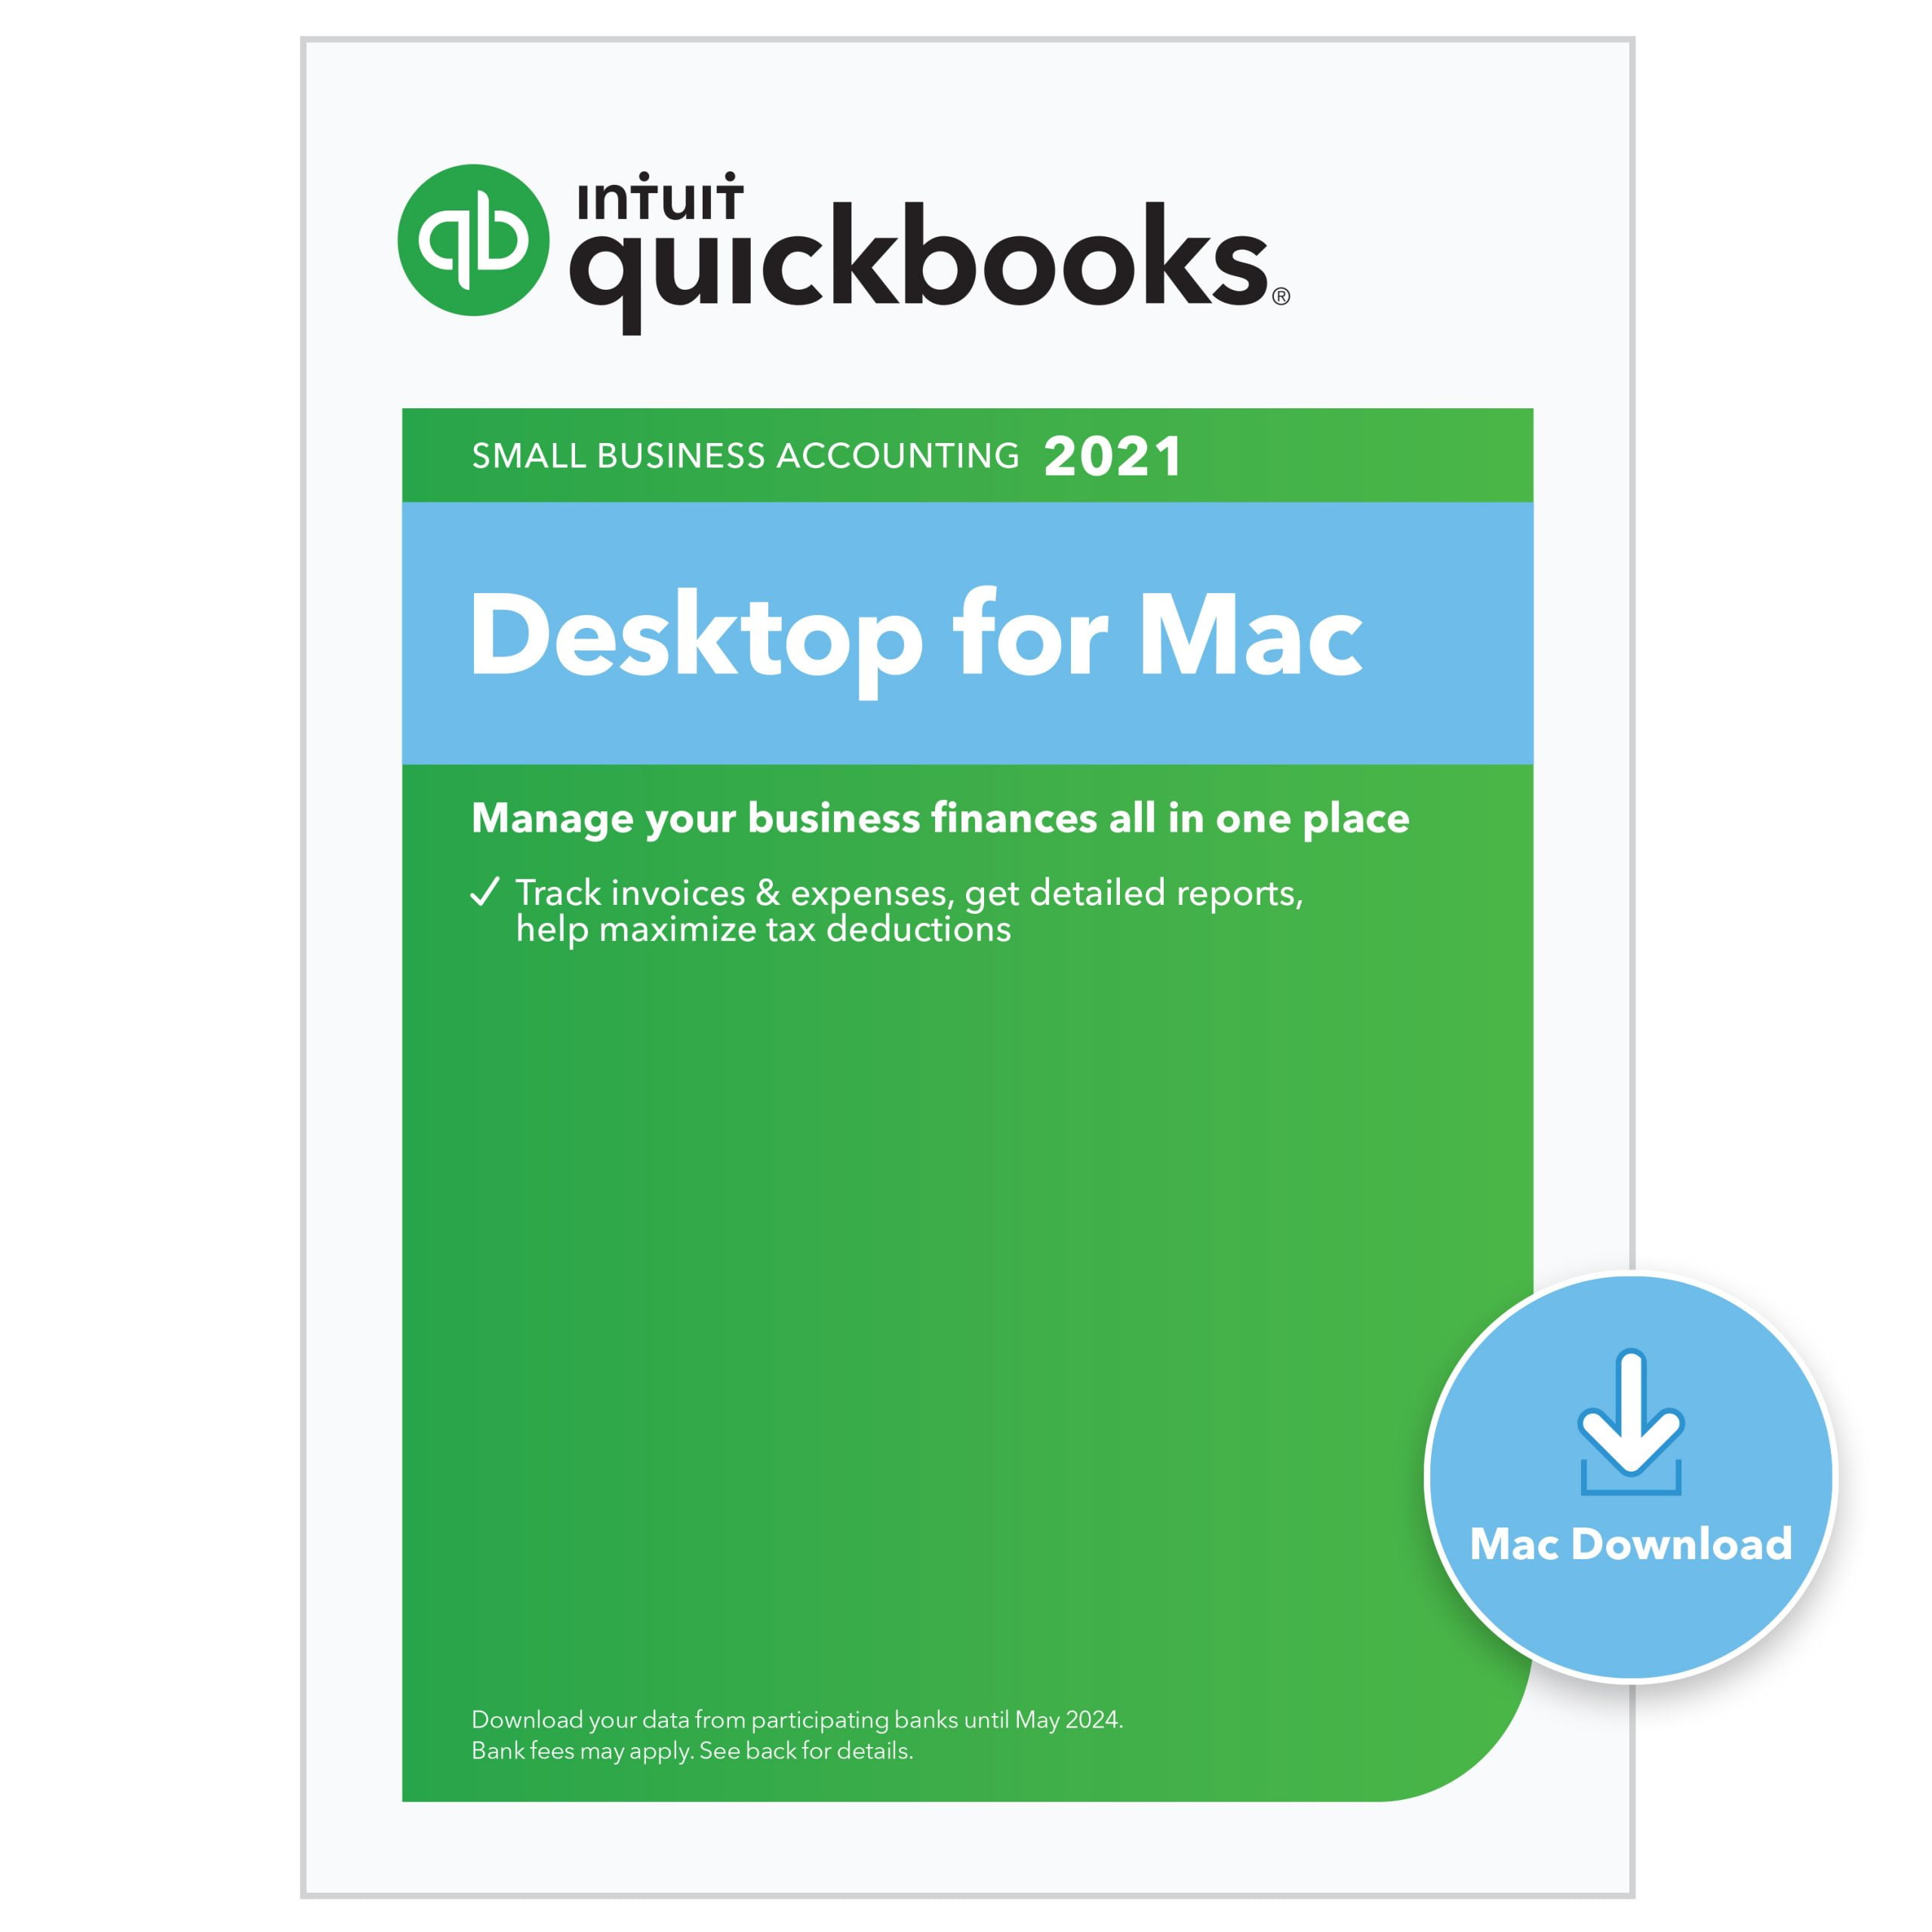 sierra and quickbooks for mac